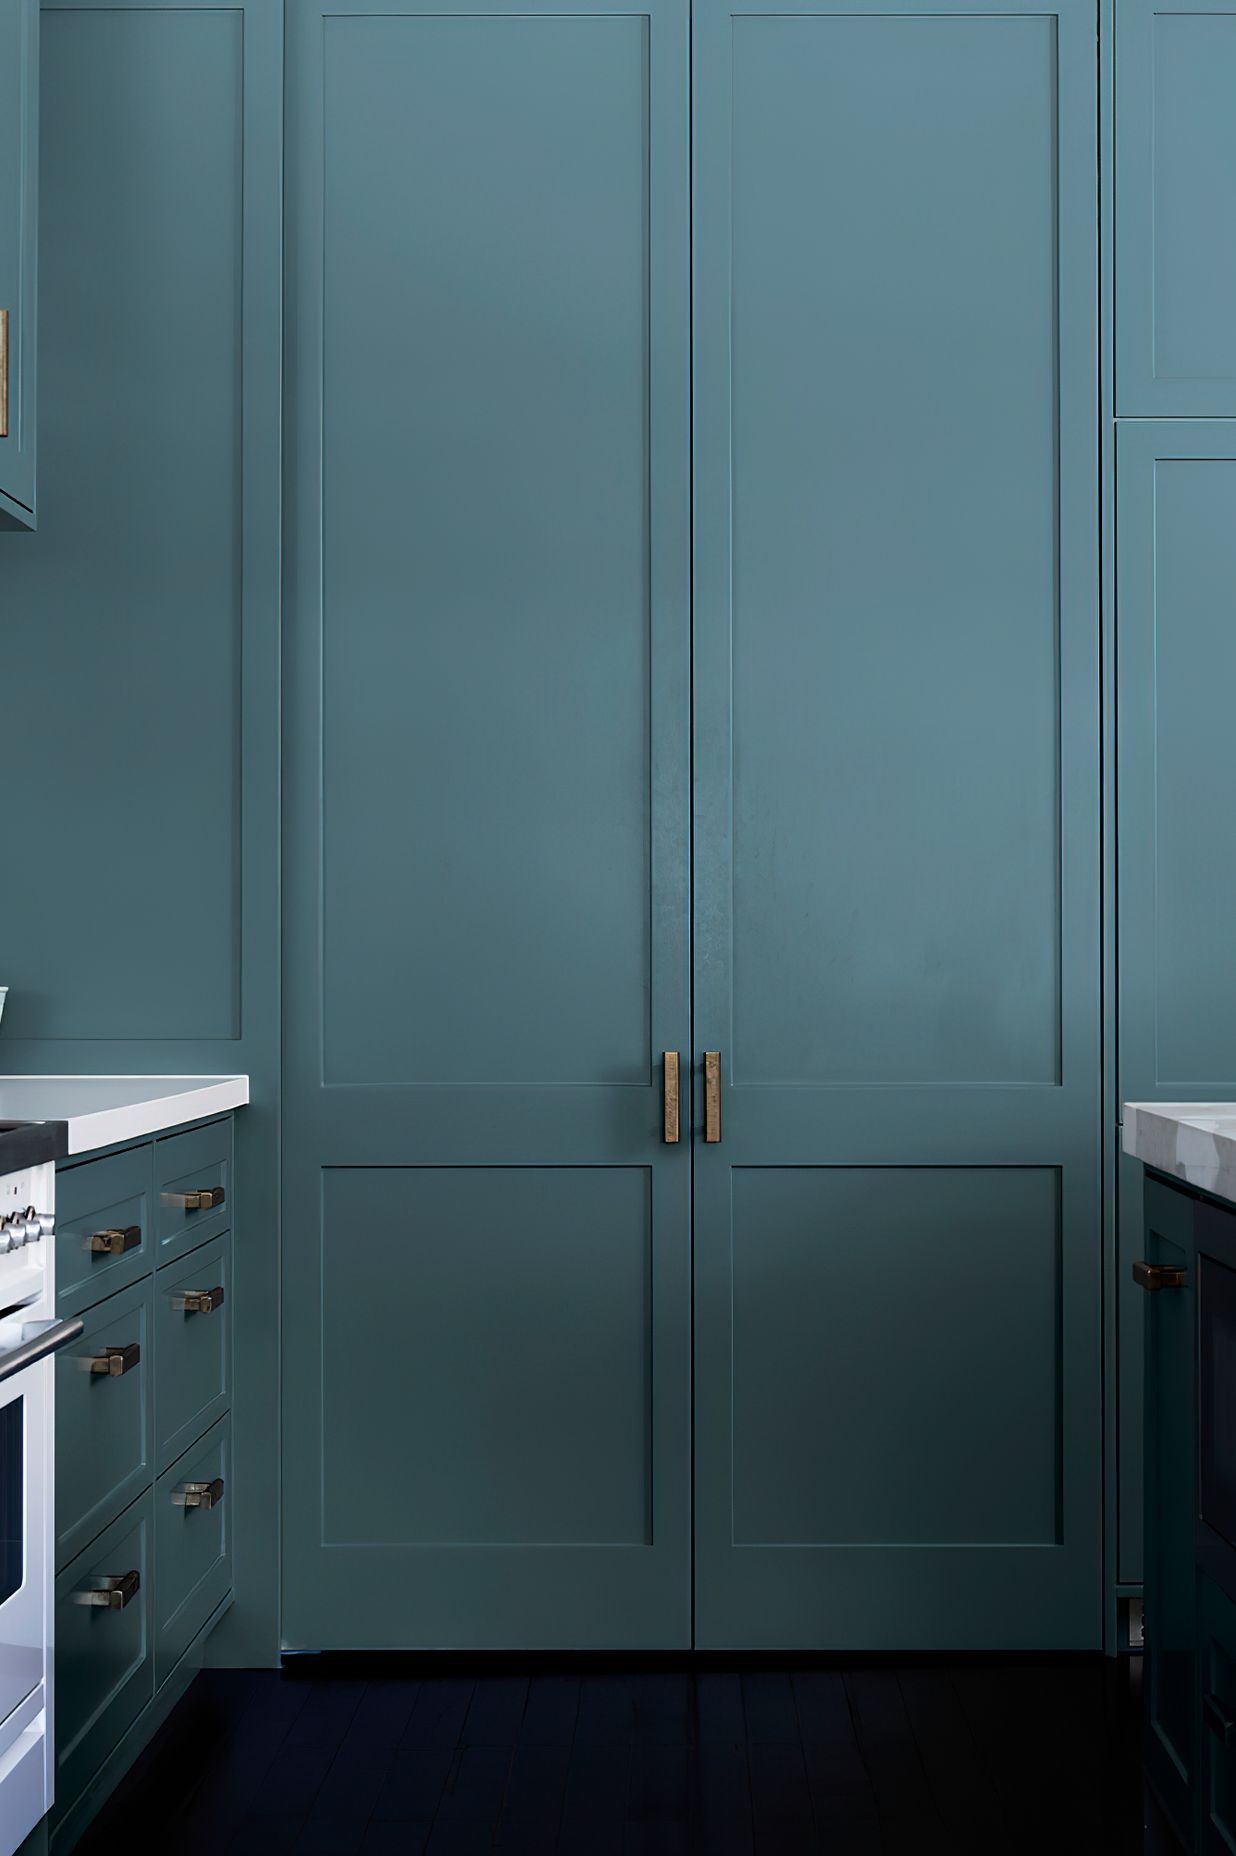 BLUE GREY PANTRY - The large pantry offers loads of storage, and with a few clever tricks, it maximises functionality. One door slides, the other swings, and to make life even easier, a sensor light turns on when the doors are opened.